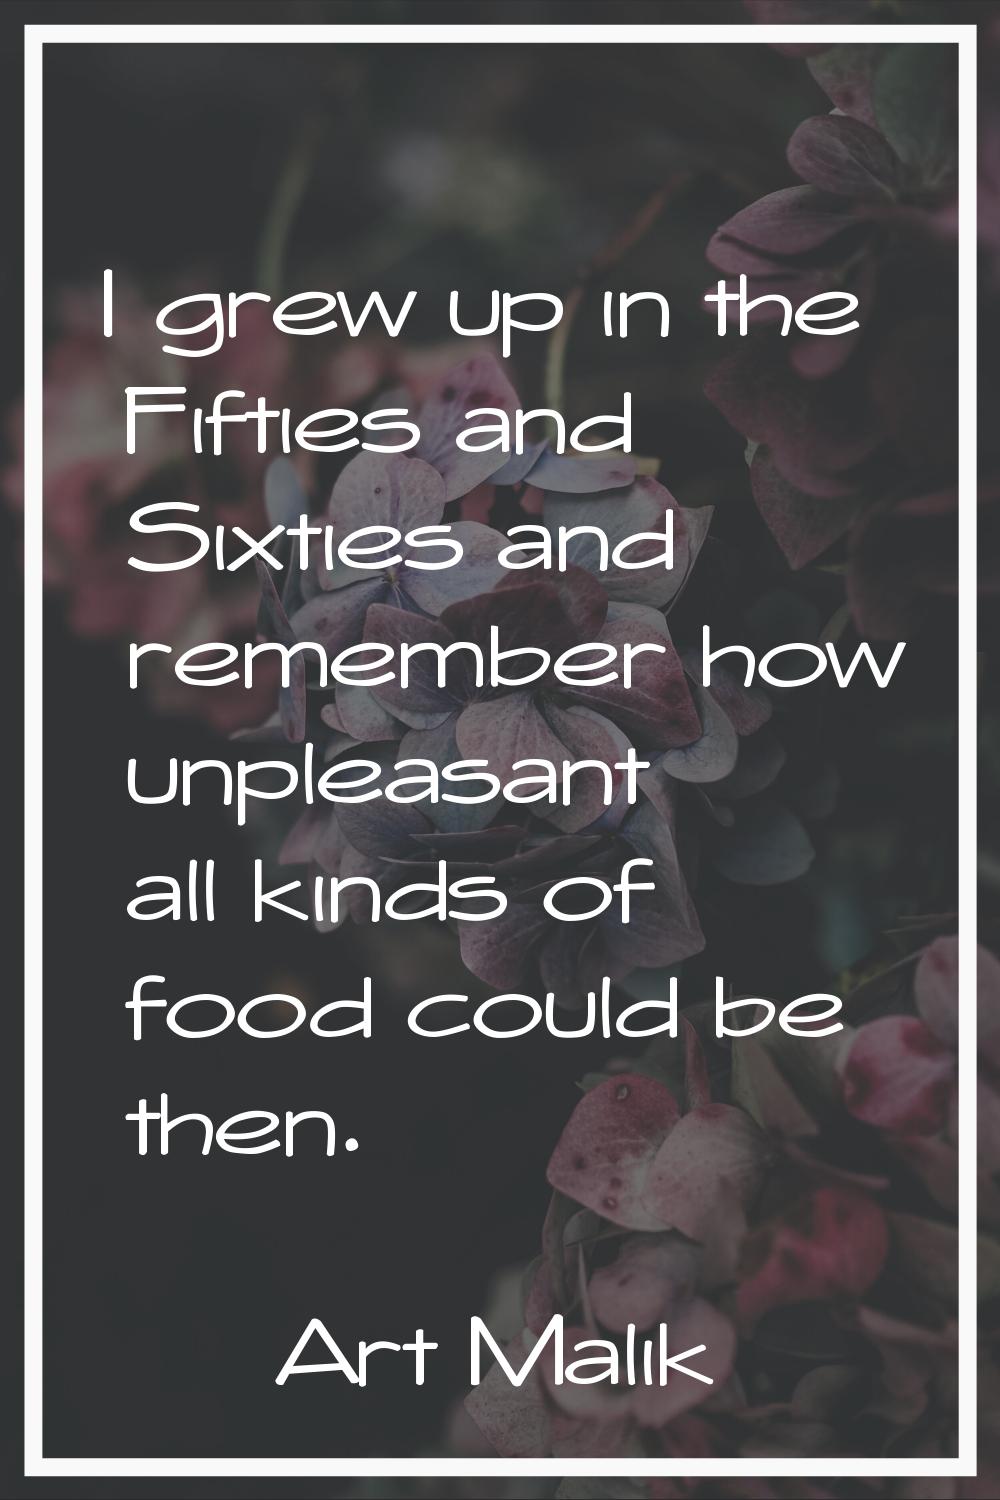 I grew up in the Fifties and Sixties and remember how unpleasant all kinds of food could be then.